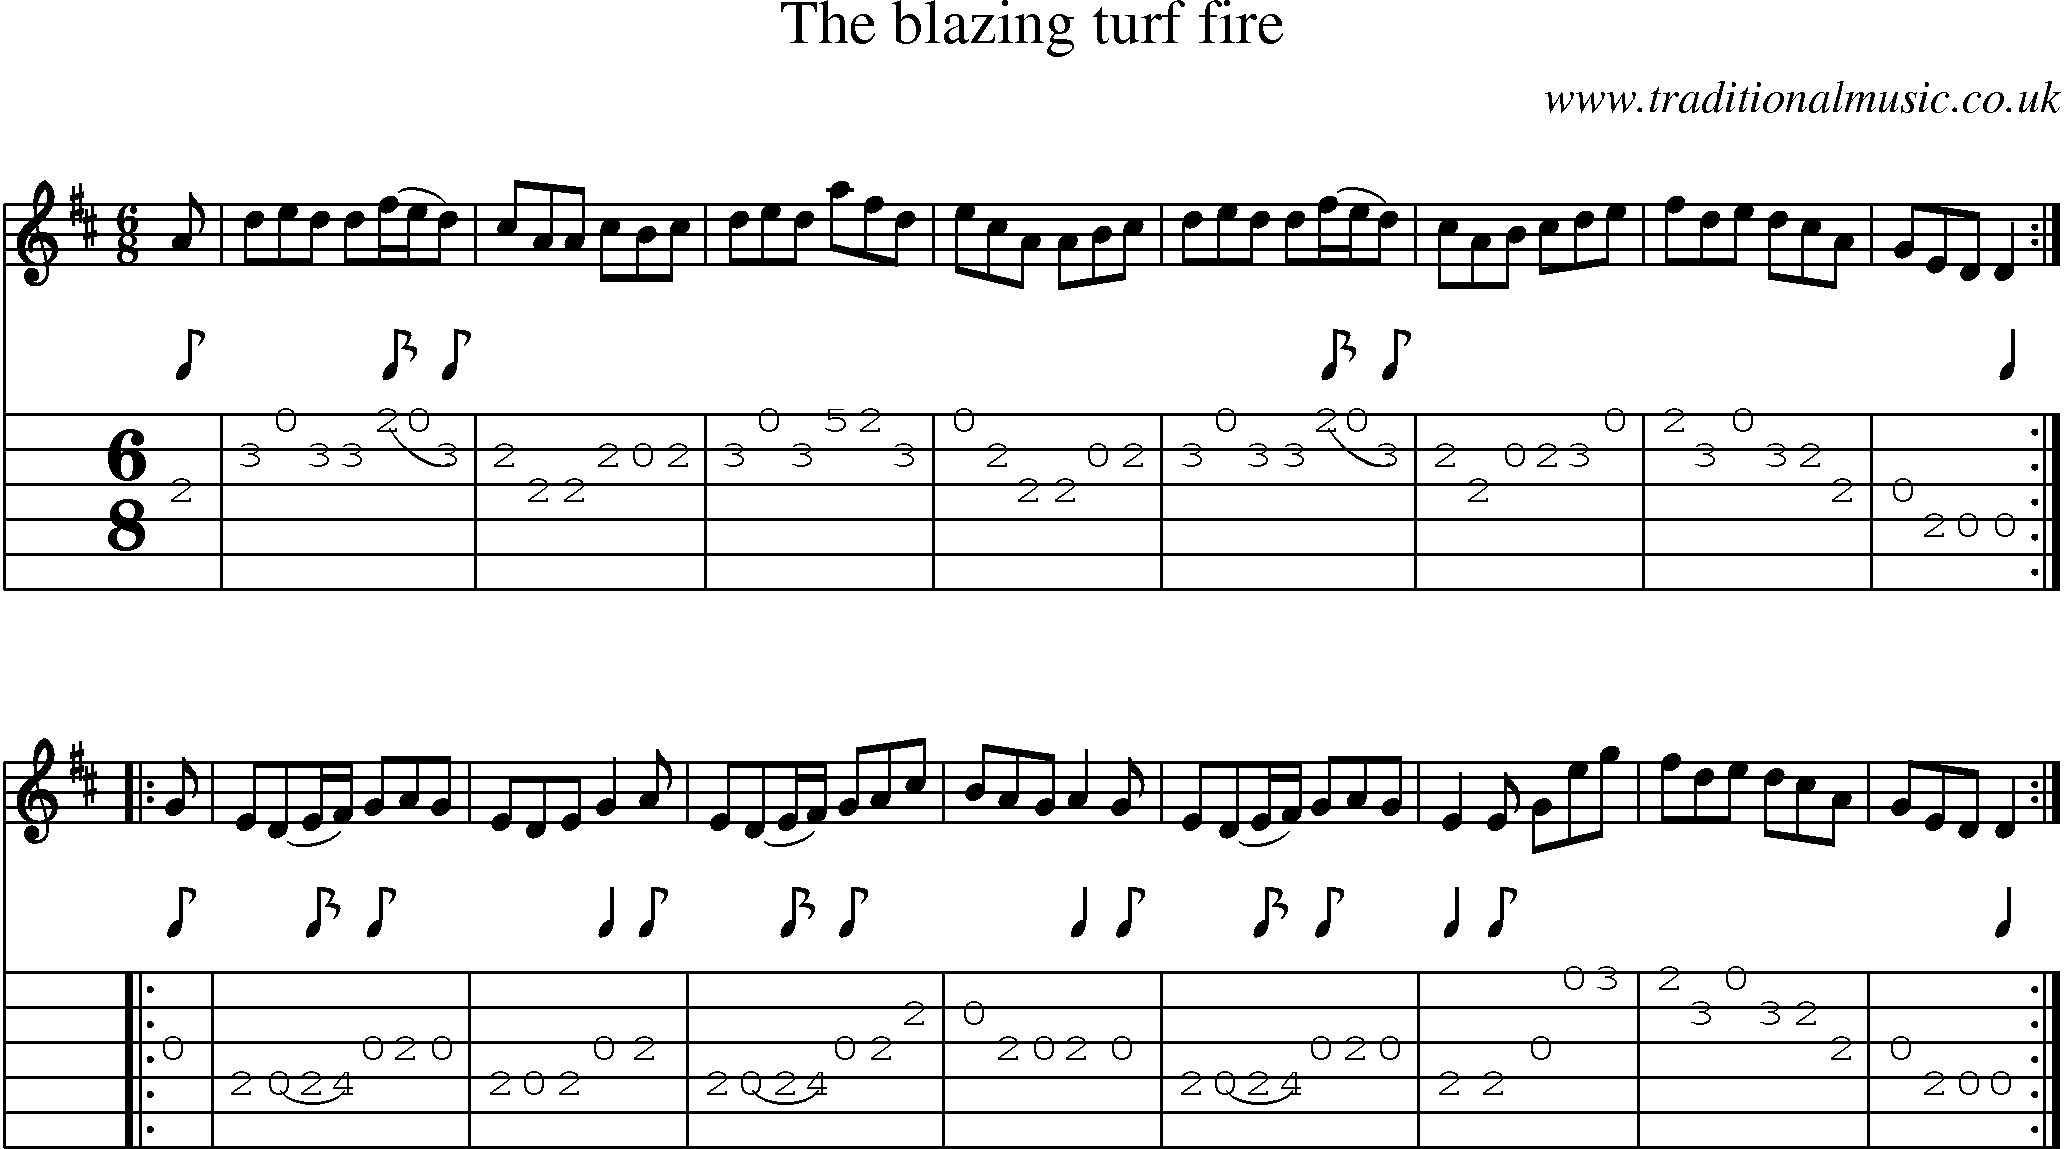 Music Score and Guitar Tabs for Blazing Turf Fire